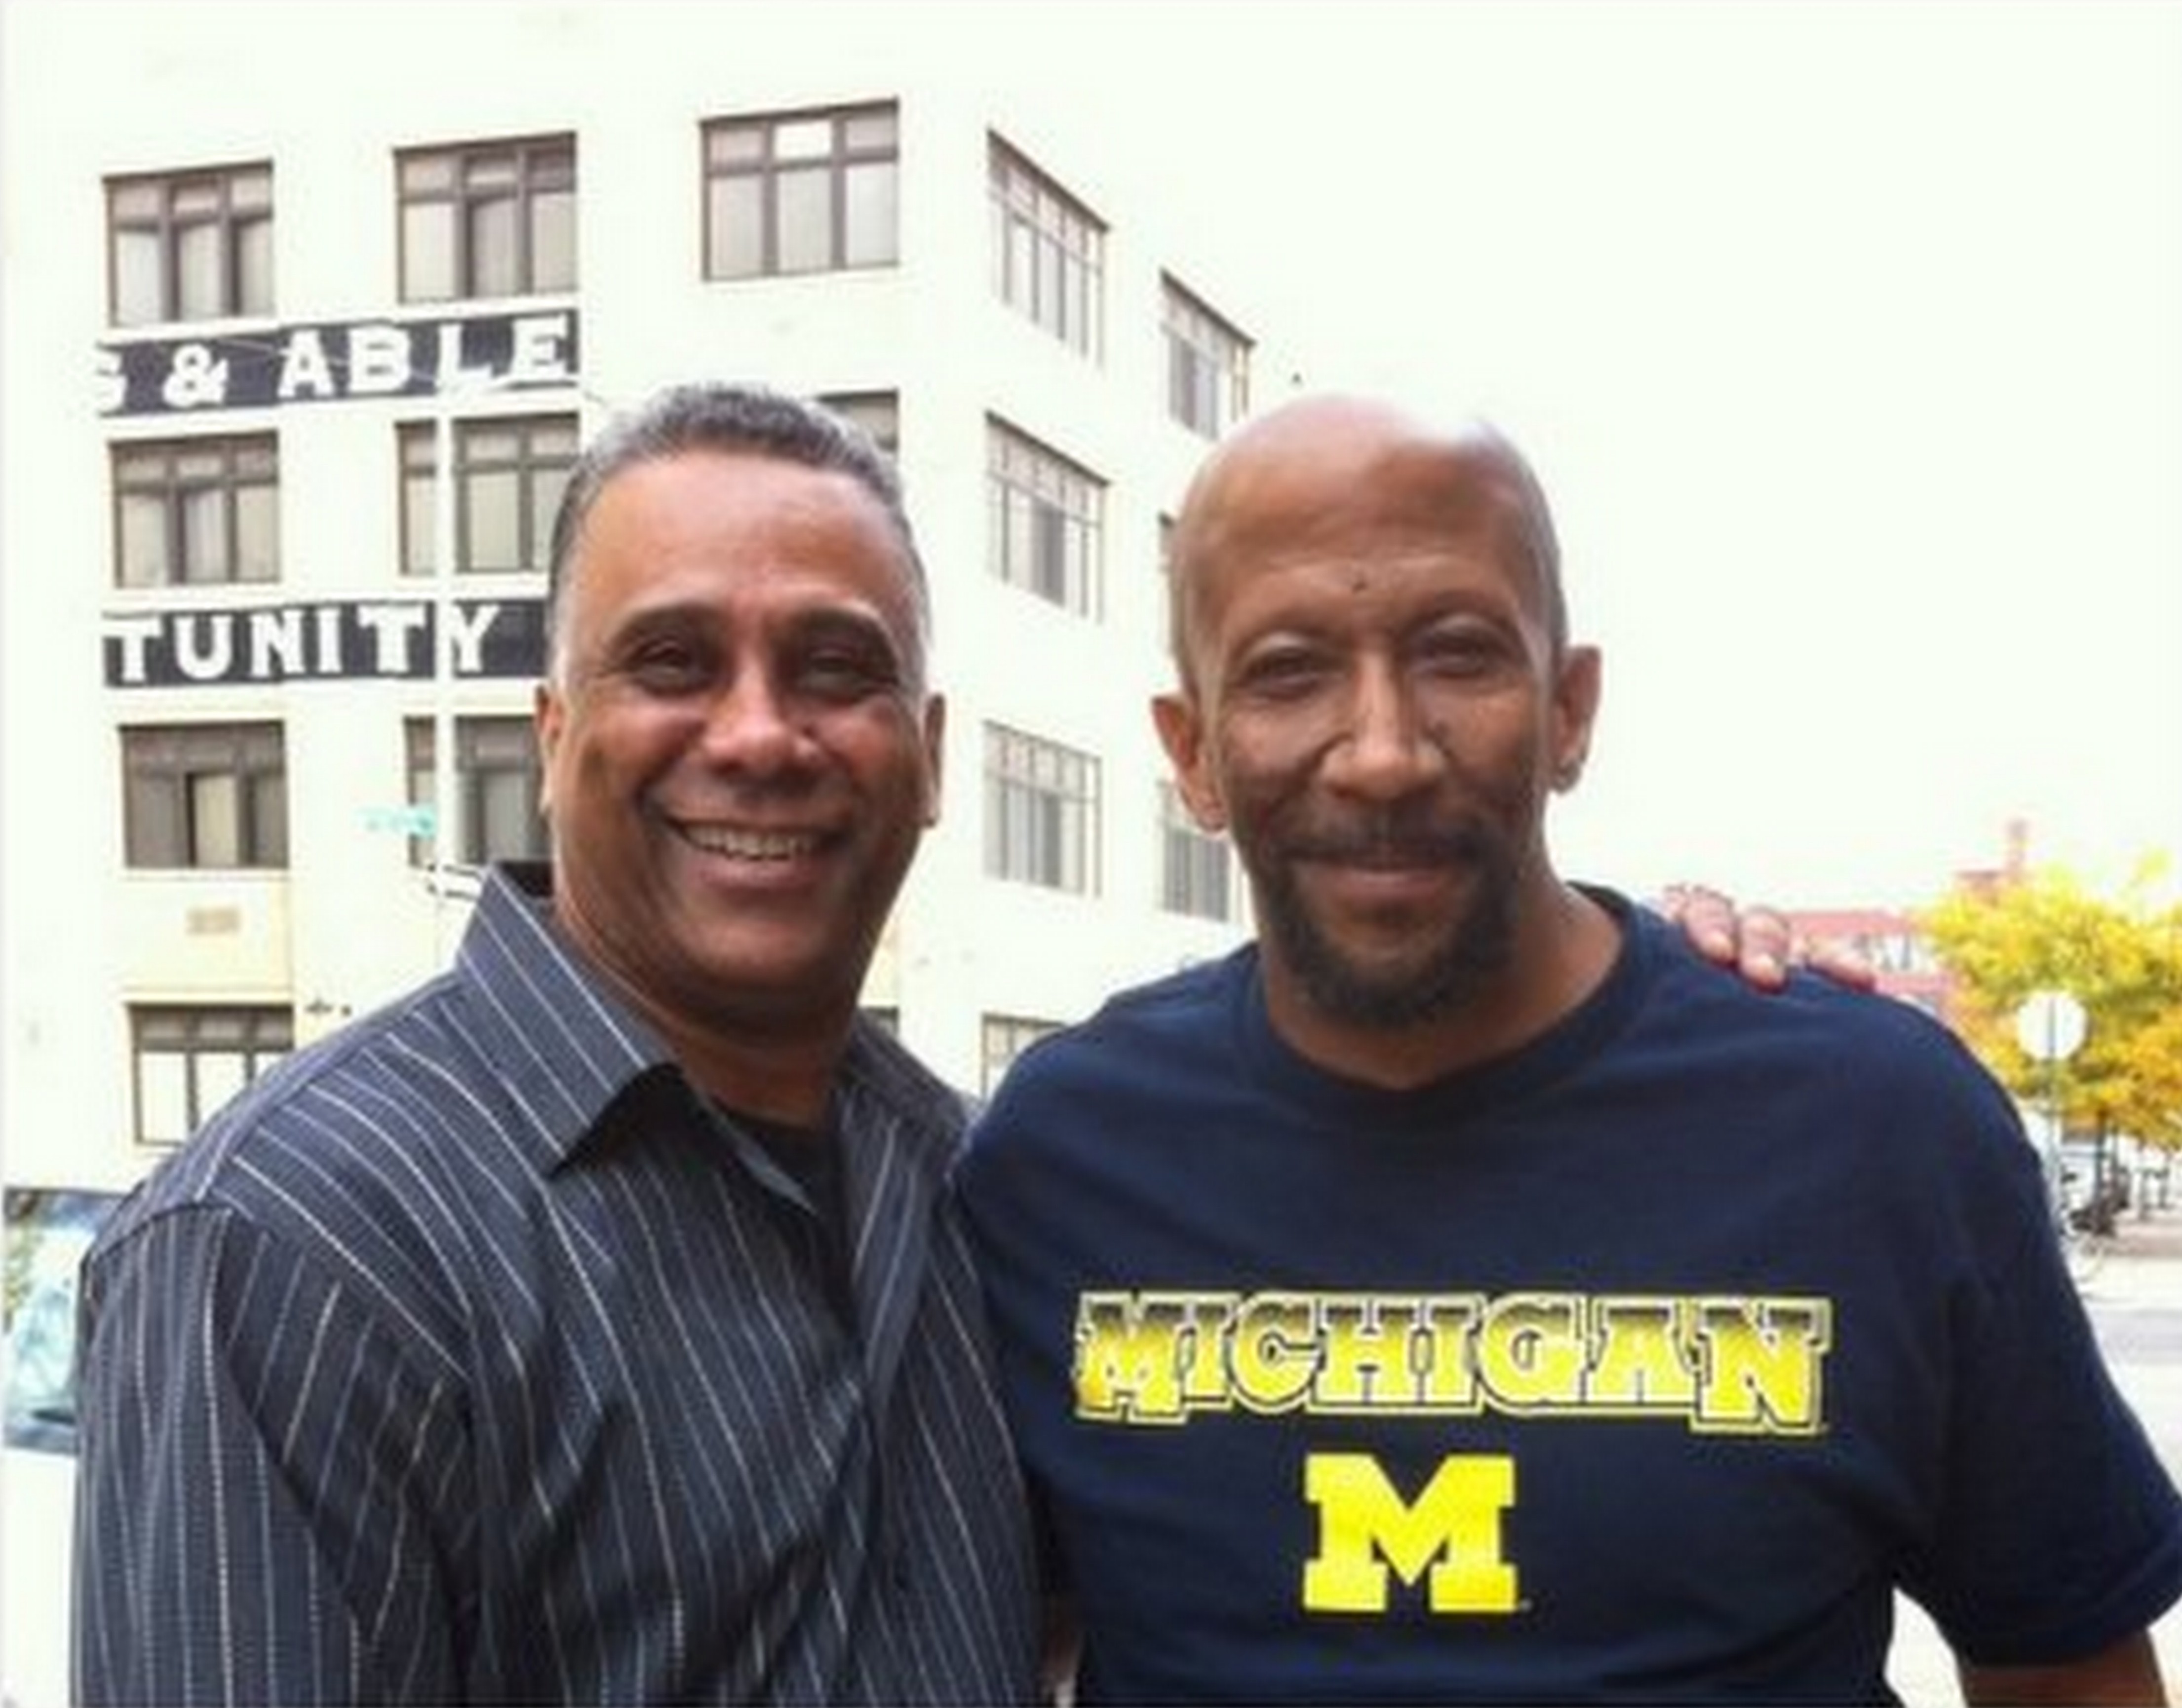 Actor REG E. CATHEY ~ Known for The Wire (HBO), The Corner (HBO), S.W.A.T, American Psycho, Fantastic 4